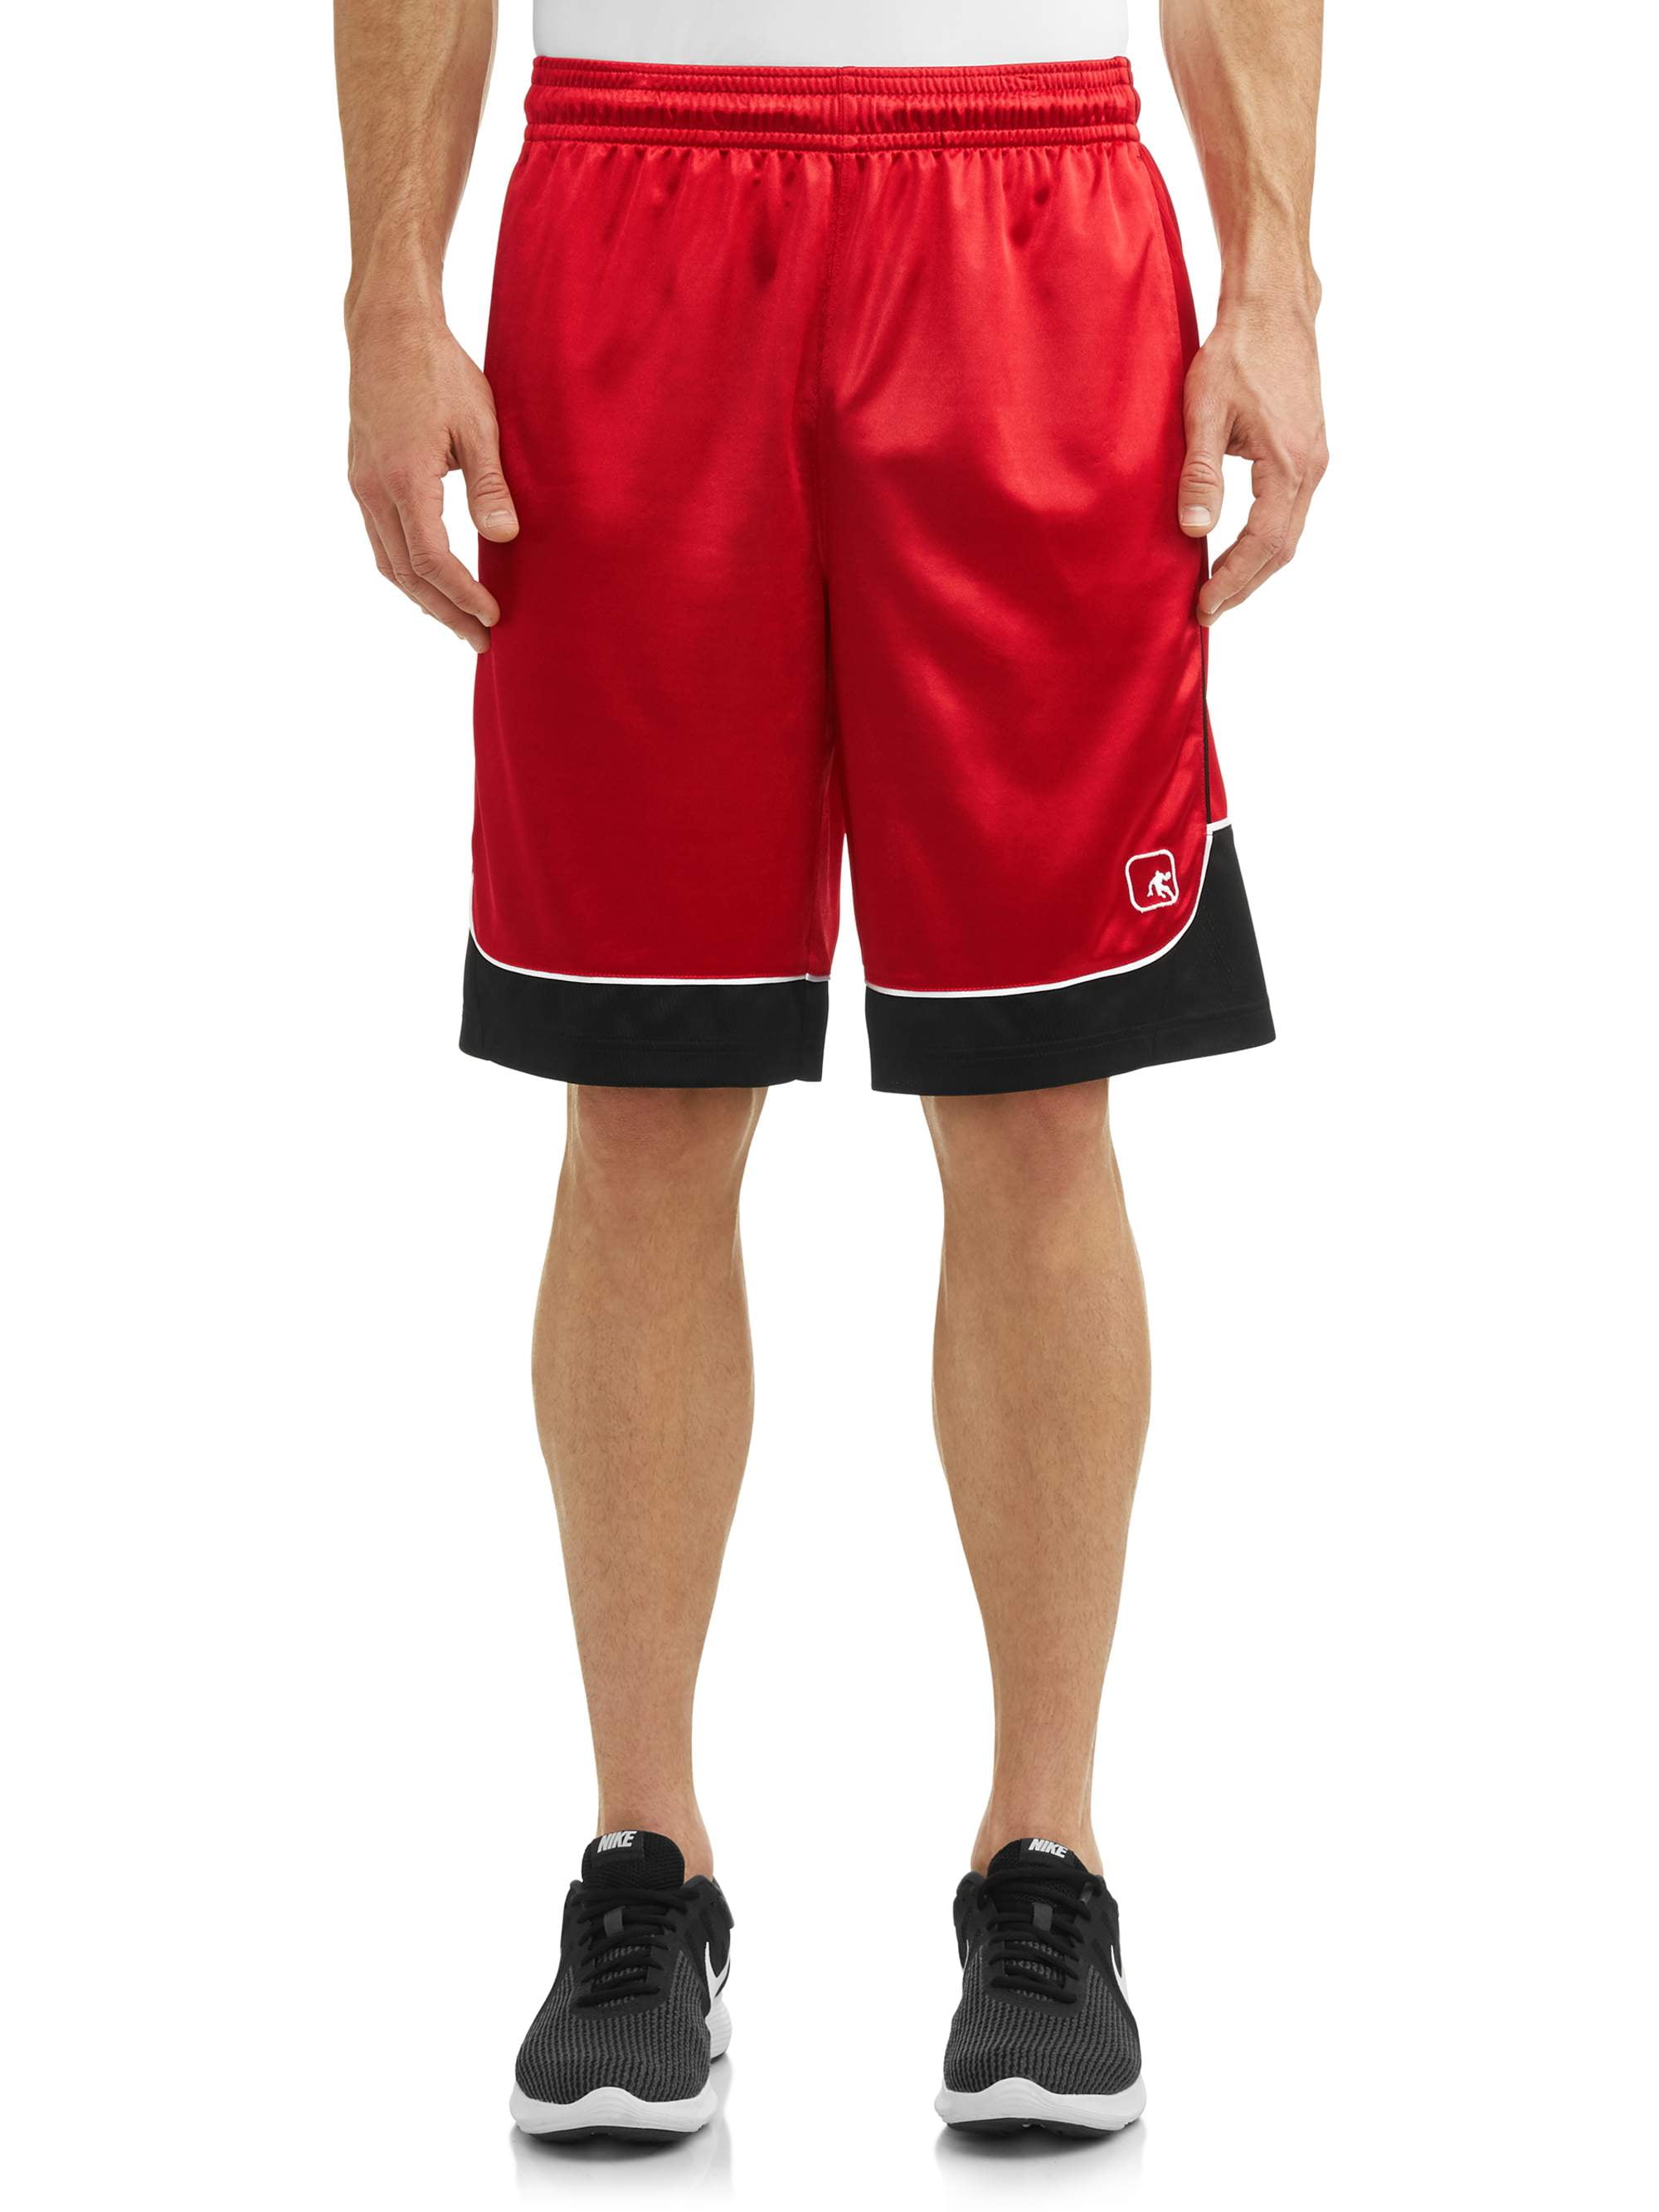 AND1 - AND1 Men's Colorblock Basketball Shorts, Up to 5XL - Walmart.com